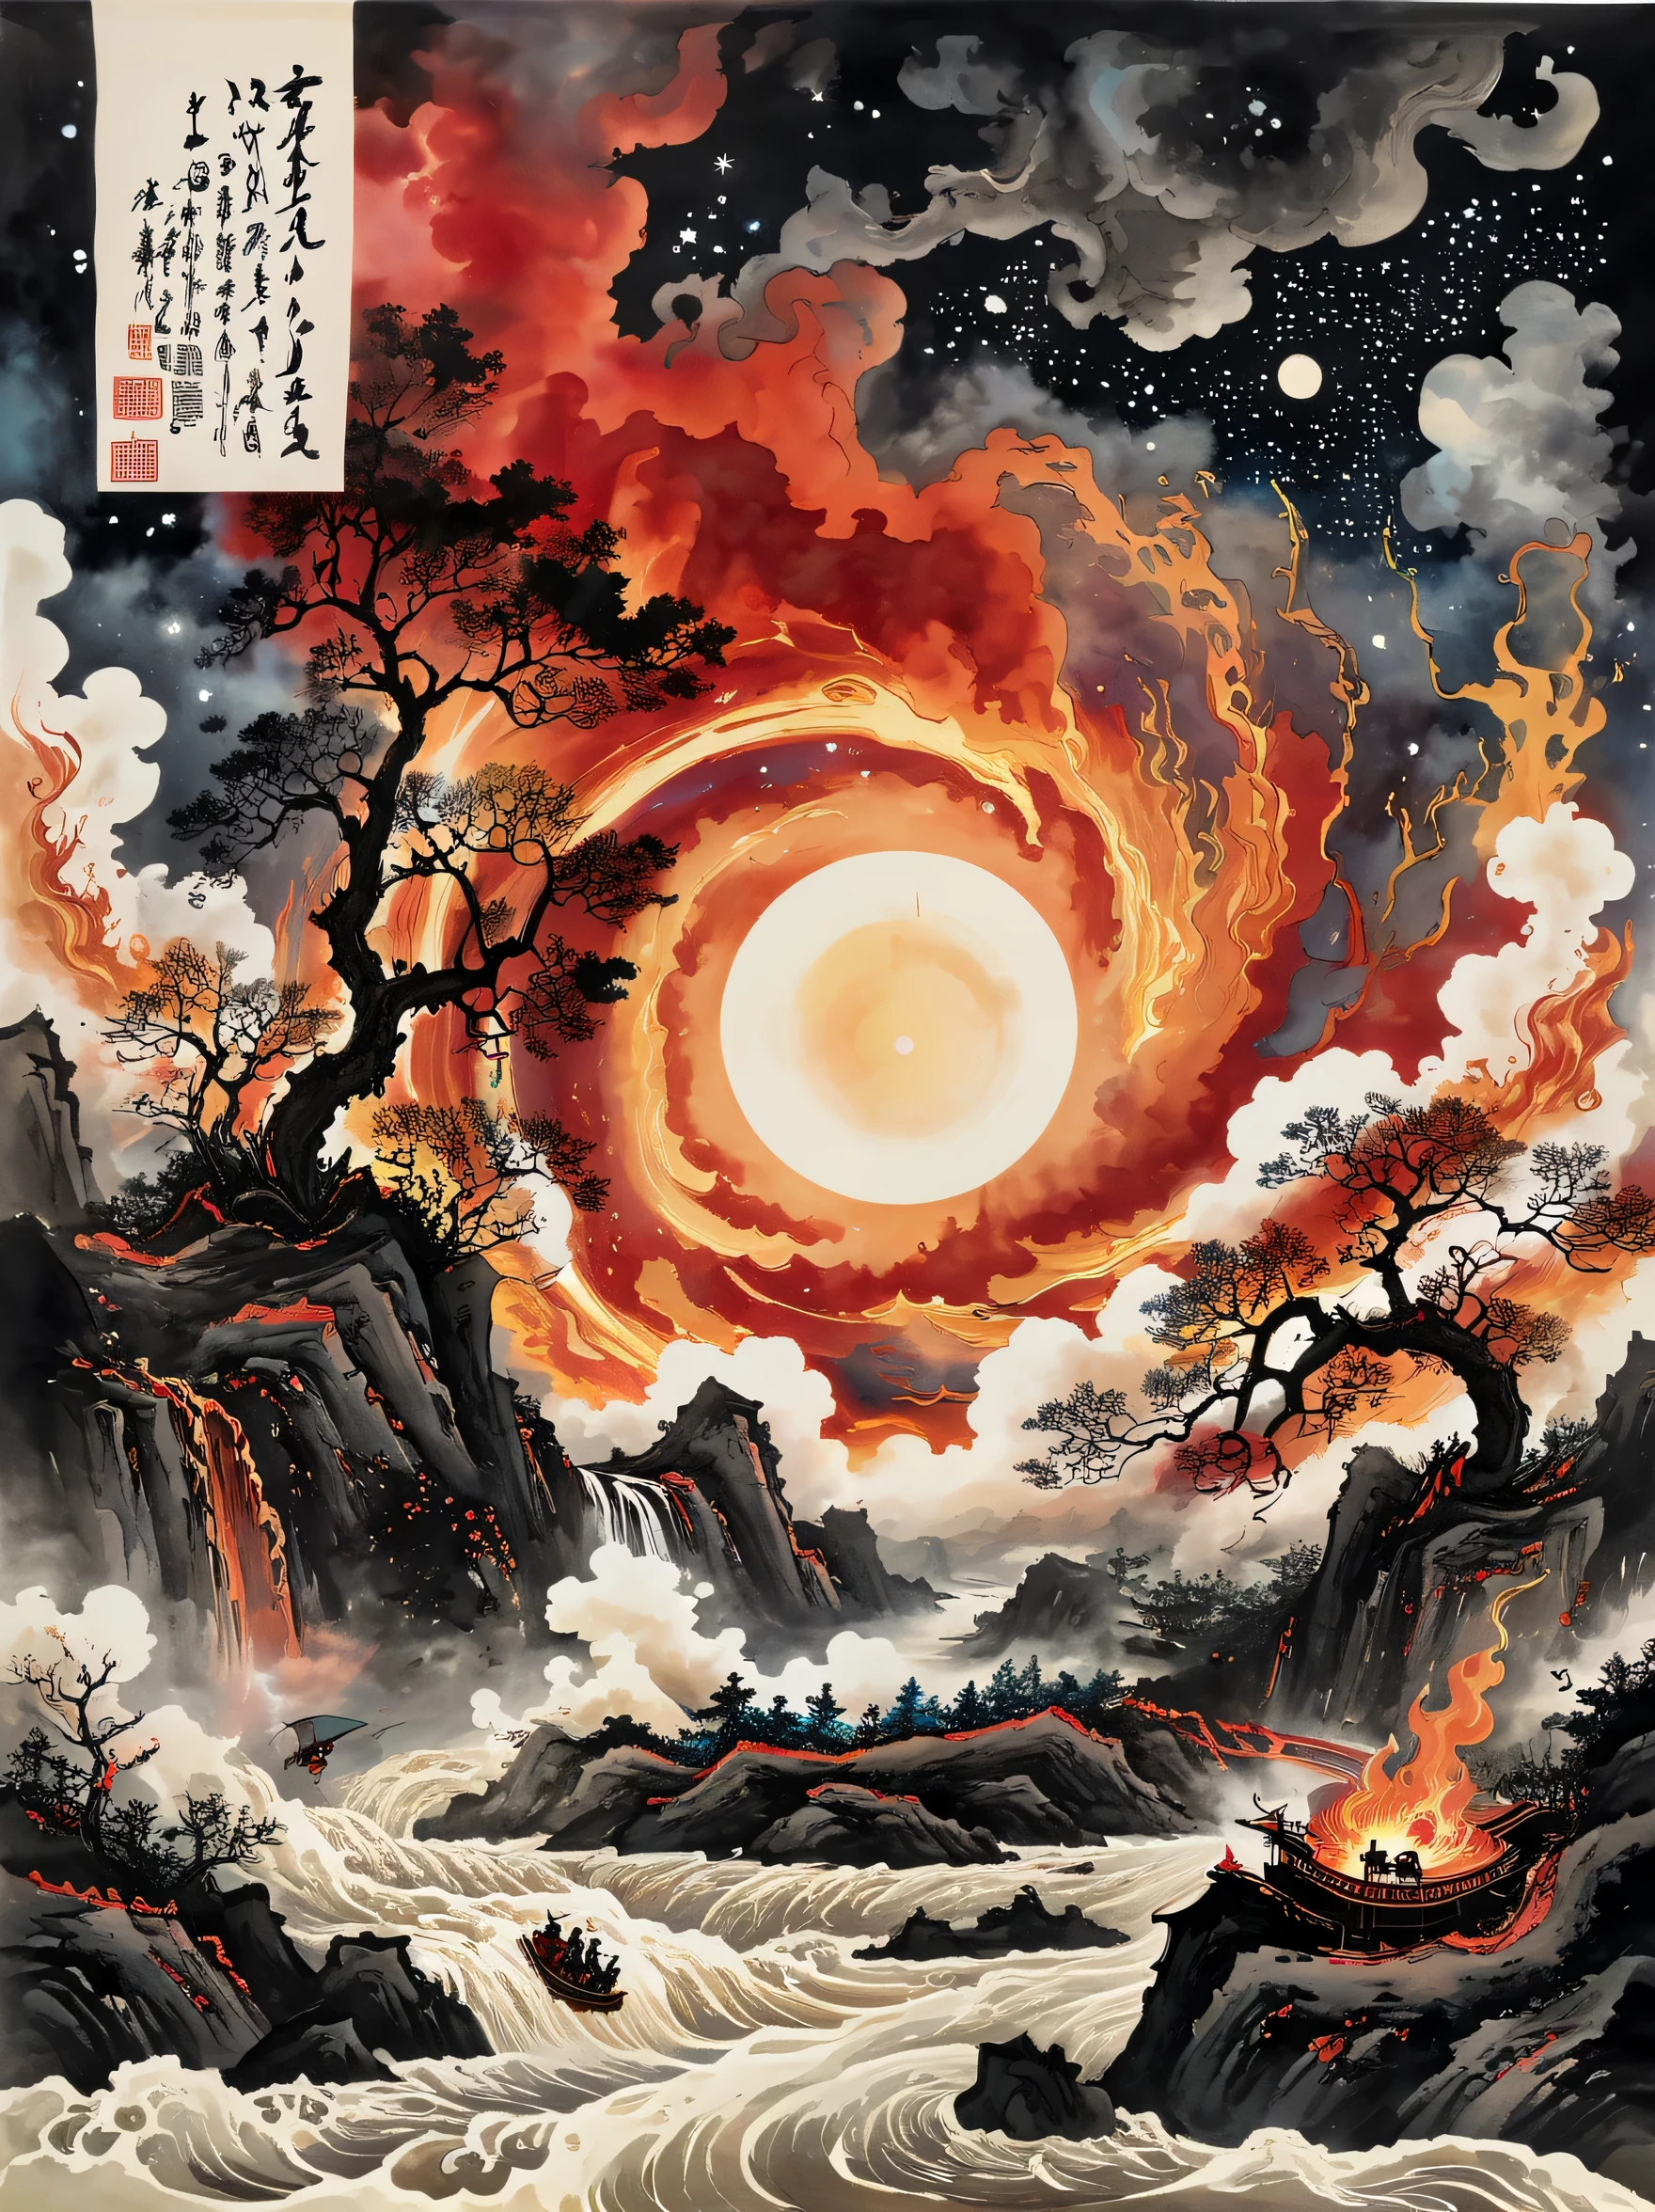 super detailed，Chinese ink style，Chinese Dream Landscape，epic disaster scene，Depicts an alien star invasion that plunges a river into chaos. reception, Silhouette of a man standing, His eyes were fixed on the starry sky above his head, In a forest engulfed in flames. The clouds above are hovering together, forming a huge eye shape. In the center of this eye, A radiant star comes, Symbolizing the fusion of heaven and earth. The contrast between fiery red and deep black clouds，dominates the scene, Reflects the conflict between warm and cold tones. This depiction provides a sense of space fragmentation and a sci-fi atmosphere, create a mixed style，instill a sense of fear and fascination.